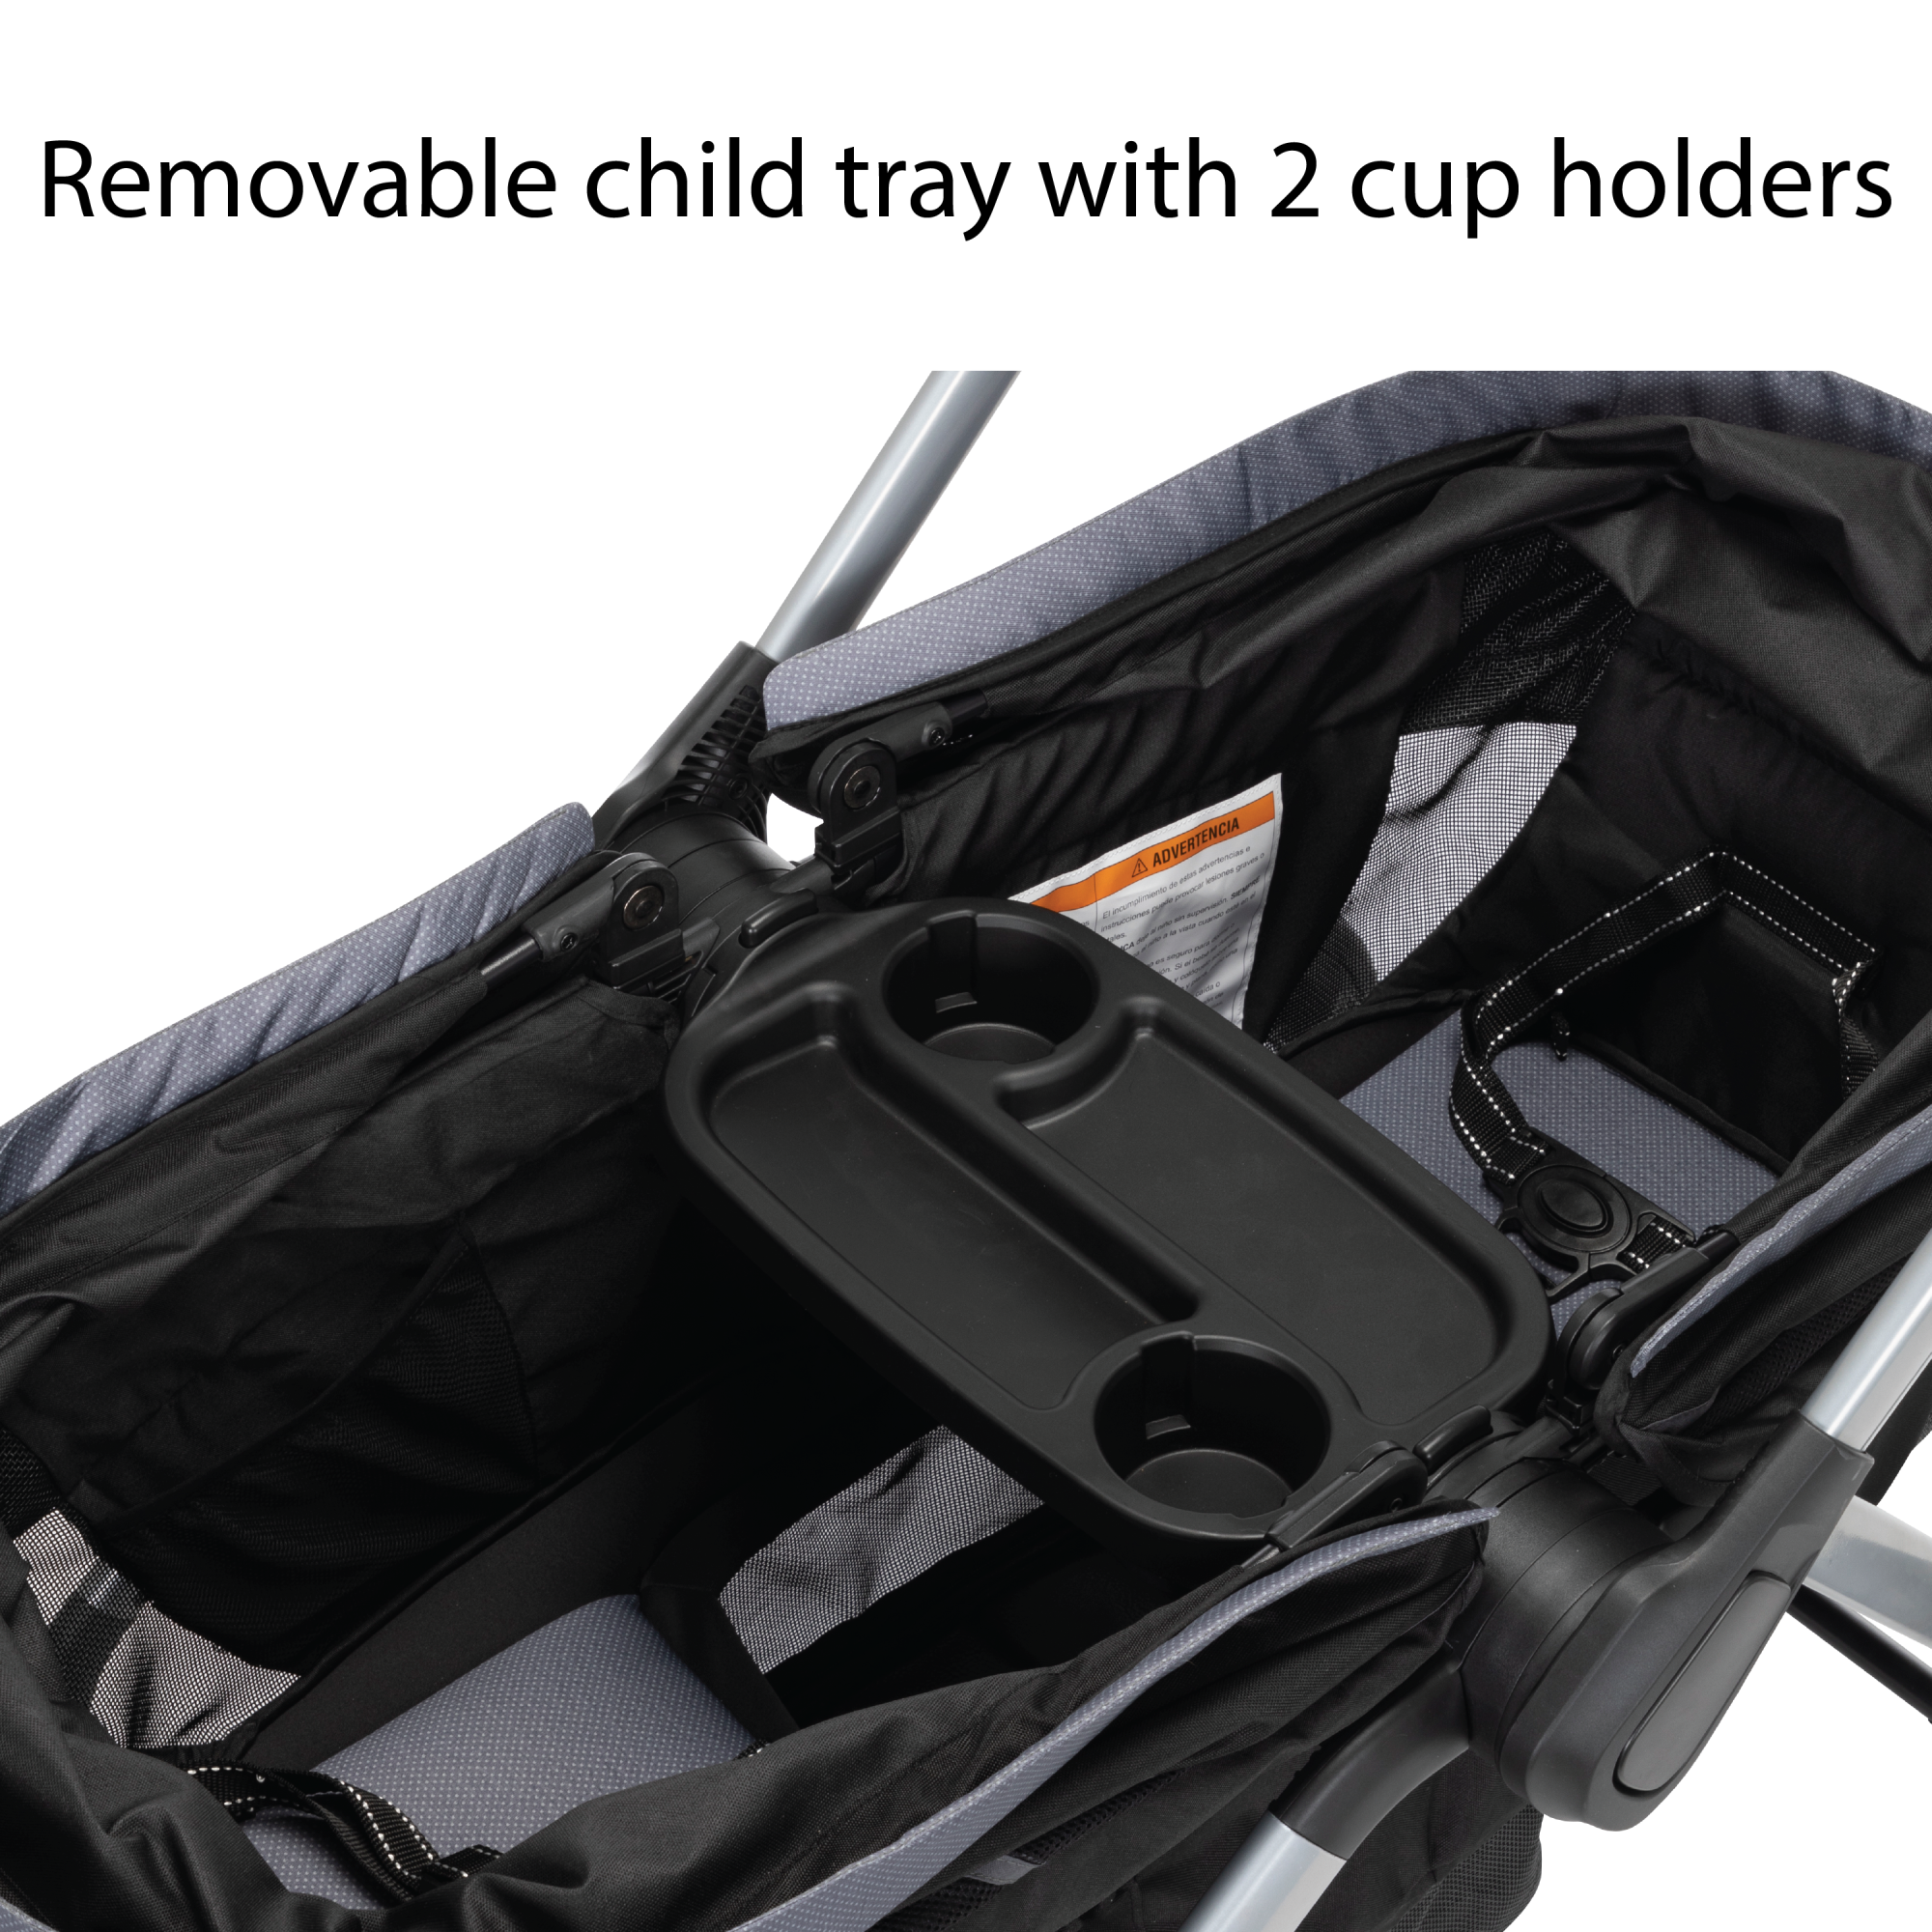 Summit Wagon Stroller - removable child tray with 2 cup holders